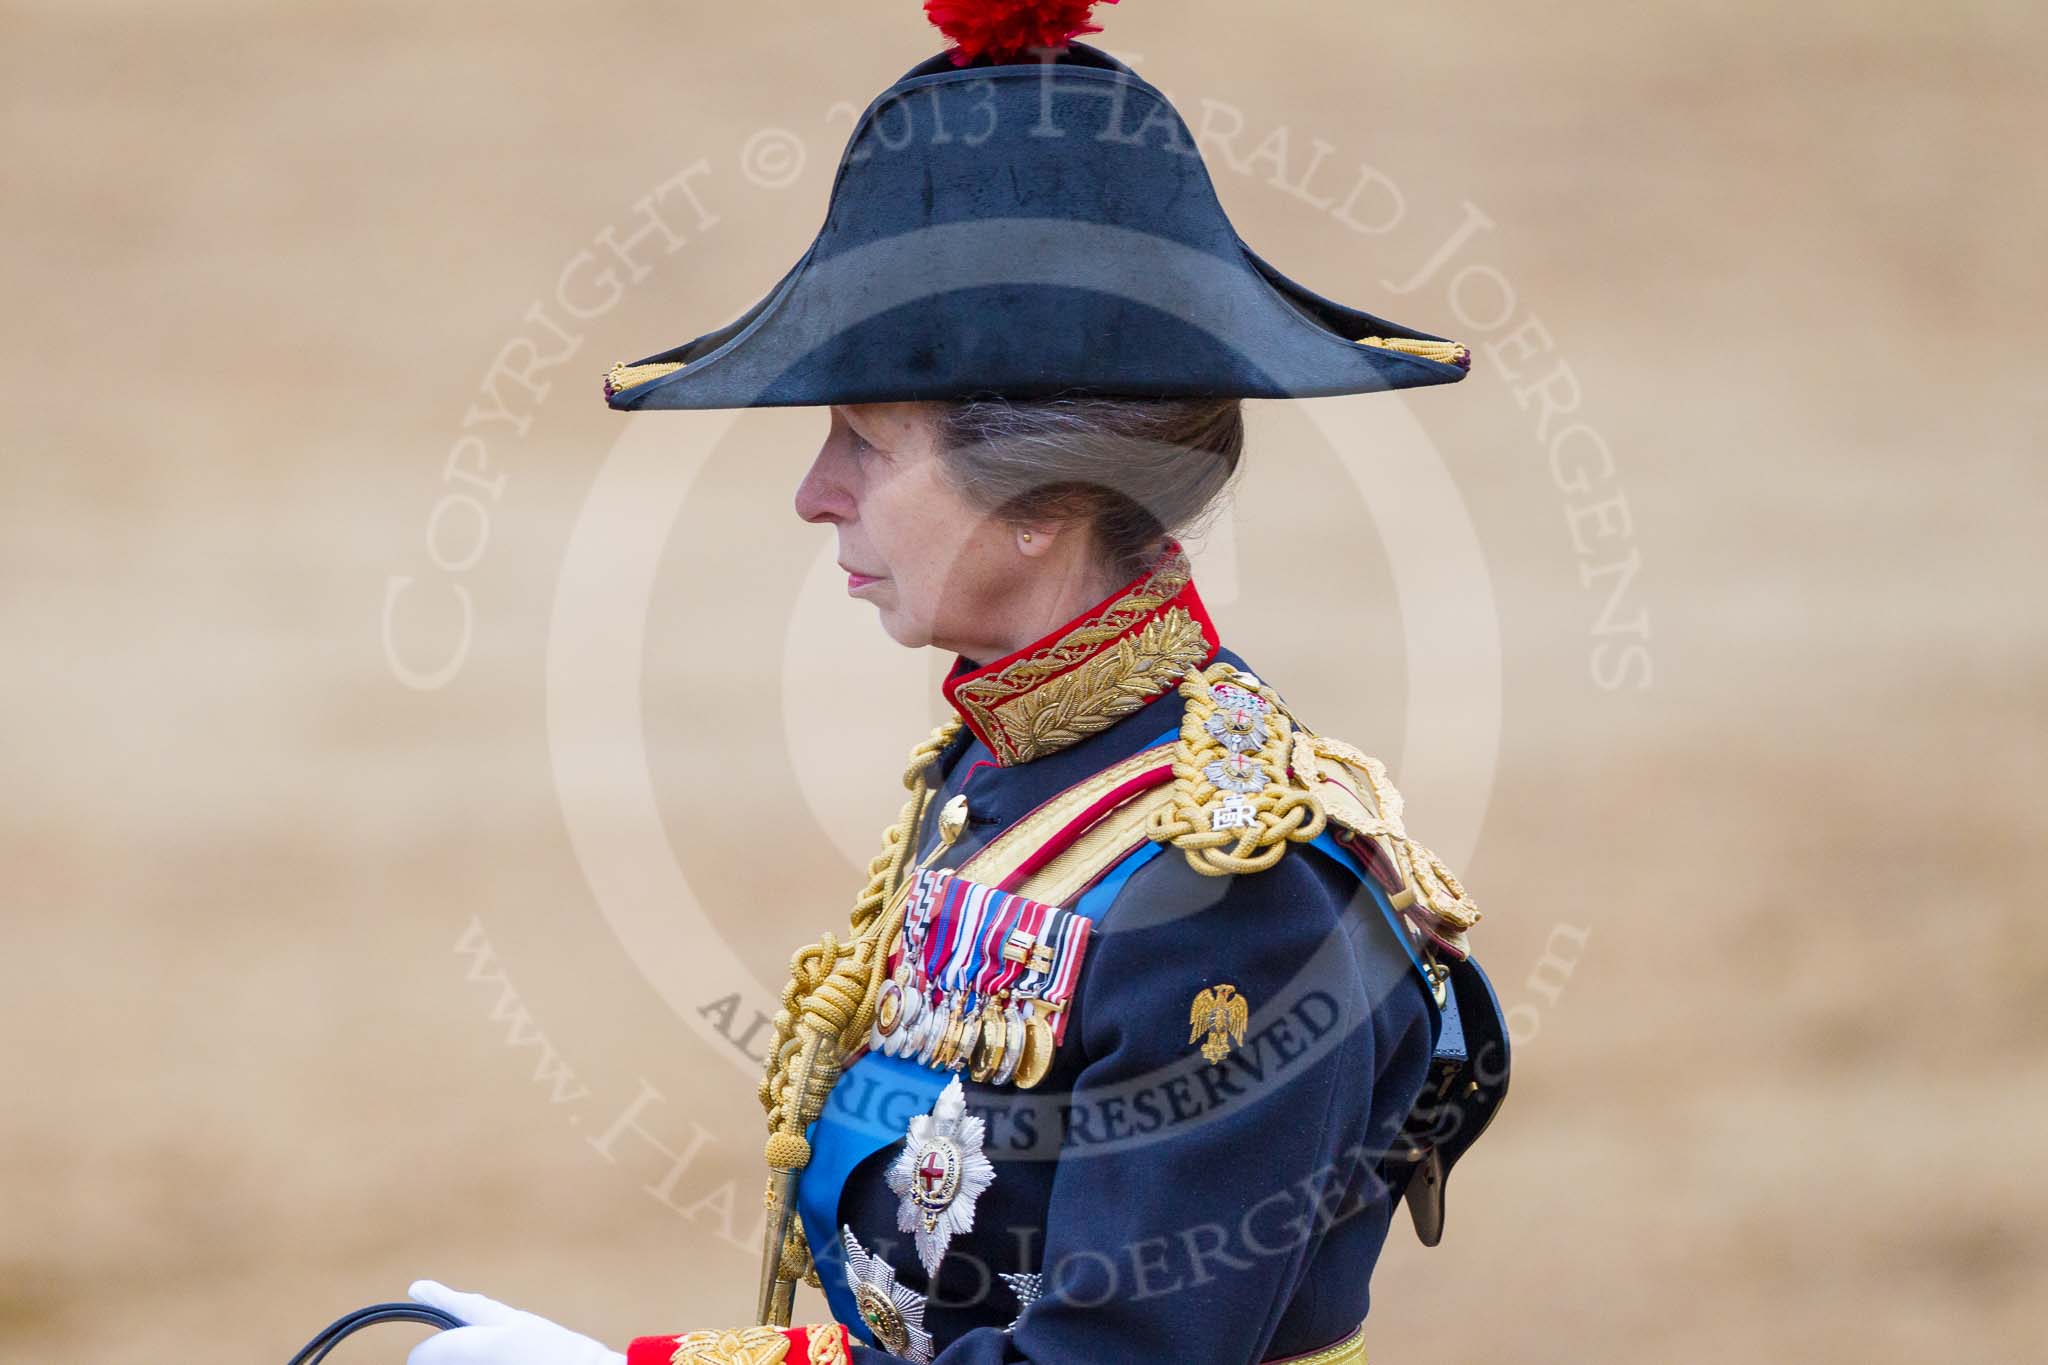 Trooping the Colour 2015. Image #664, 13 June 2015 12:09 Horse Guards Parade, London, UK